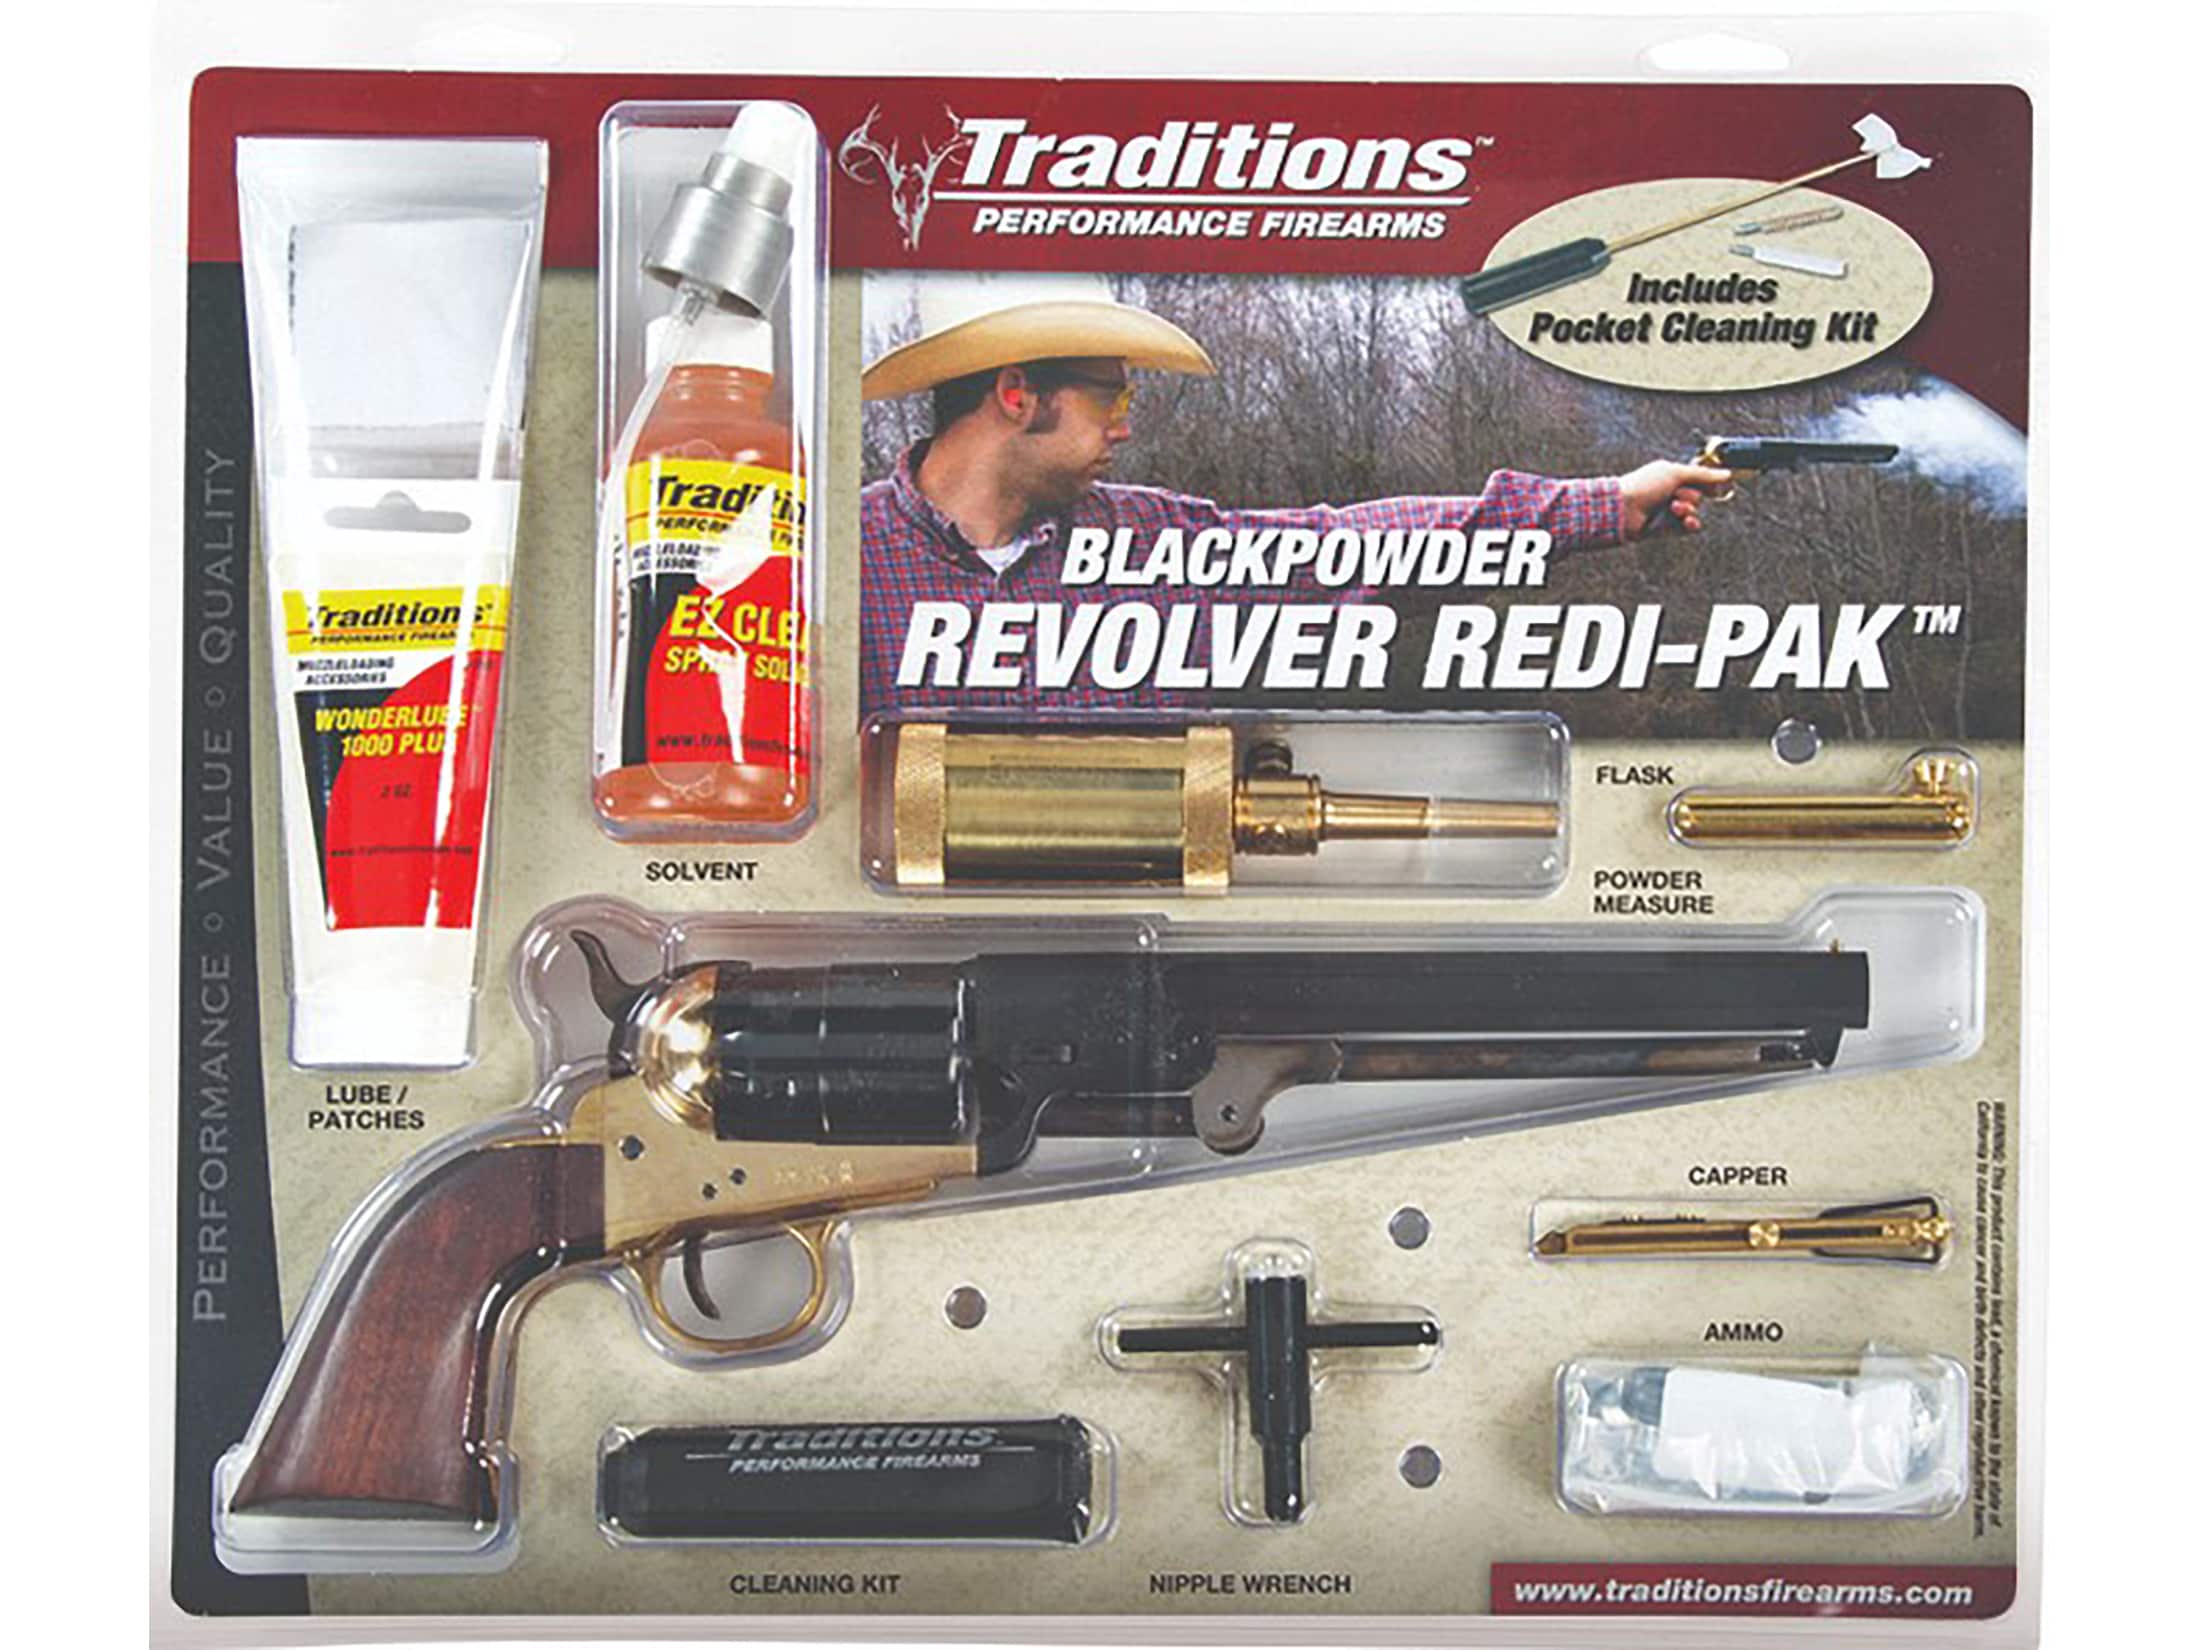 IV. How to Choose the Right Cleaning Kit for Your Black Powder Firearm